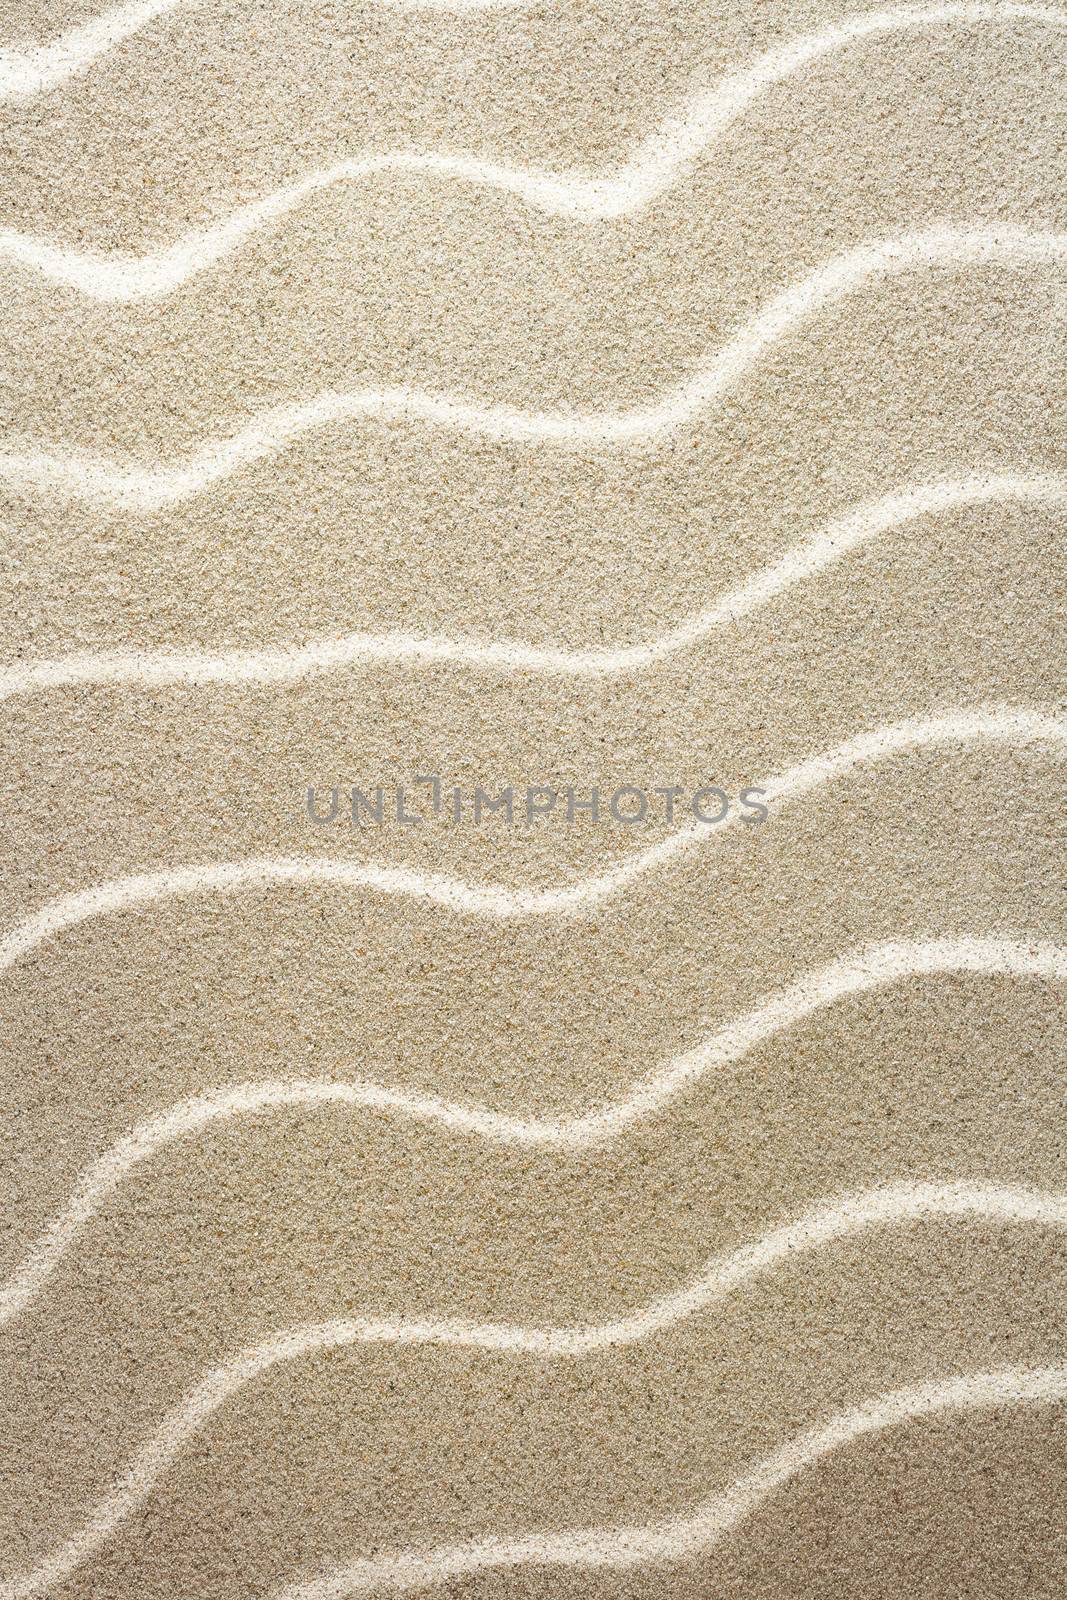 Sandy beach texture for background. Top view